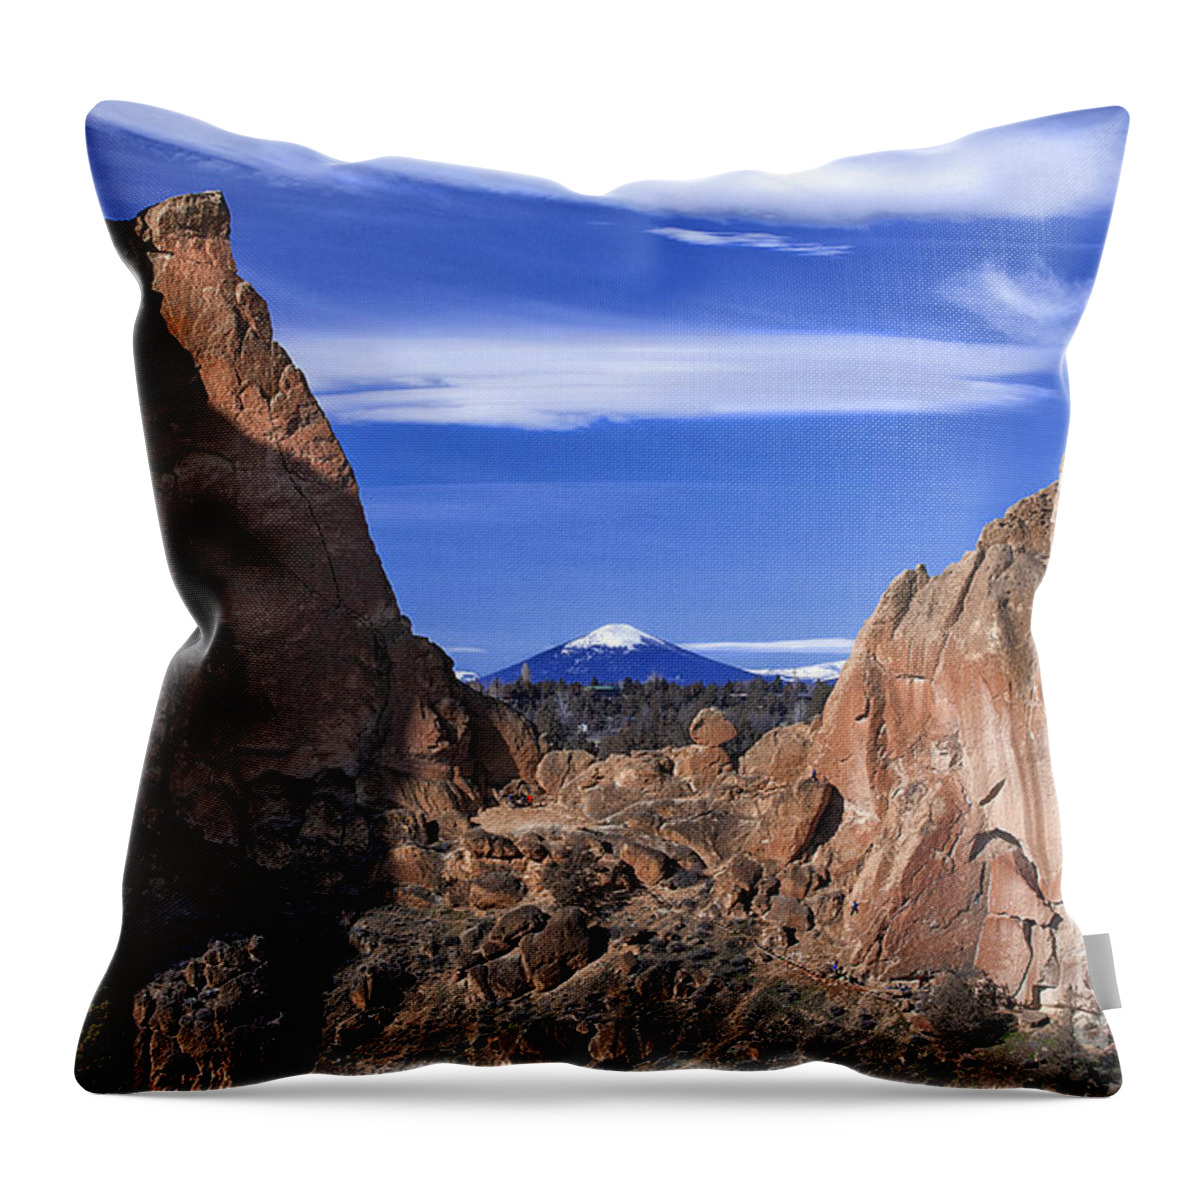 Scenic Blue Sky Rocky Mountain Cliffs Photography Throw Pillow featuring the photograph Scenic Blue Sky View Between Smith Rock Mountain Rugged Cliffs by Jerry Cowart